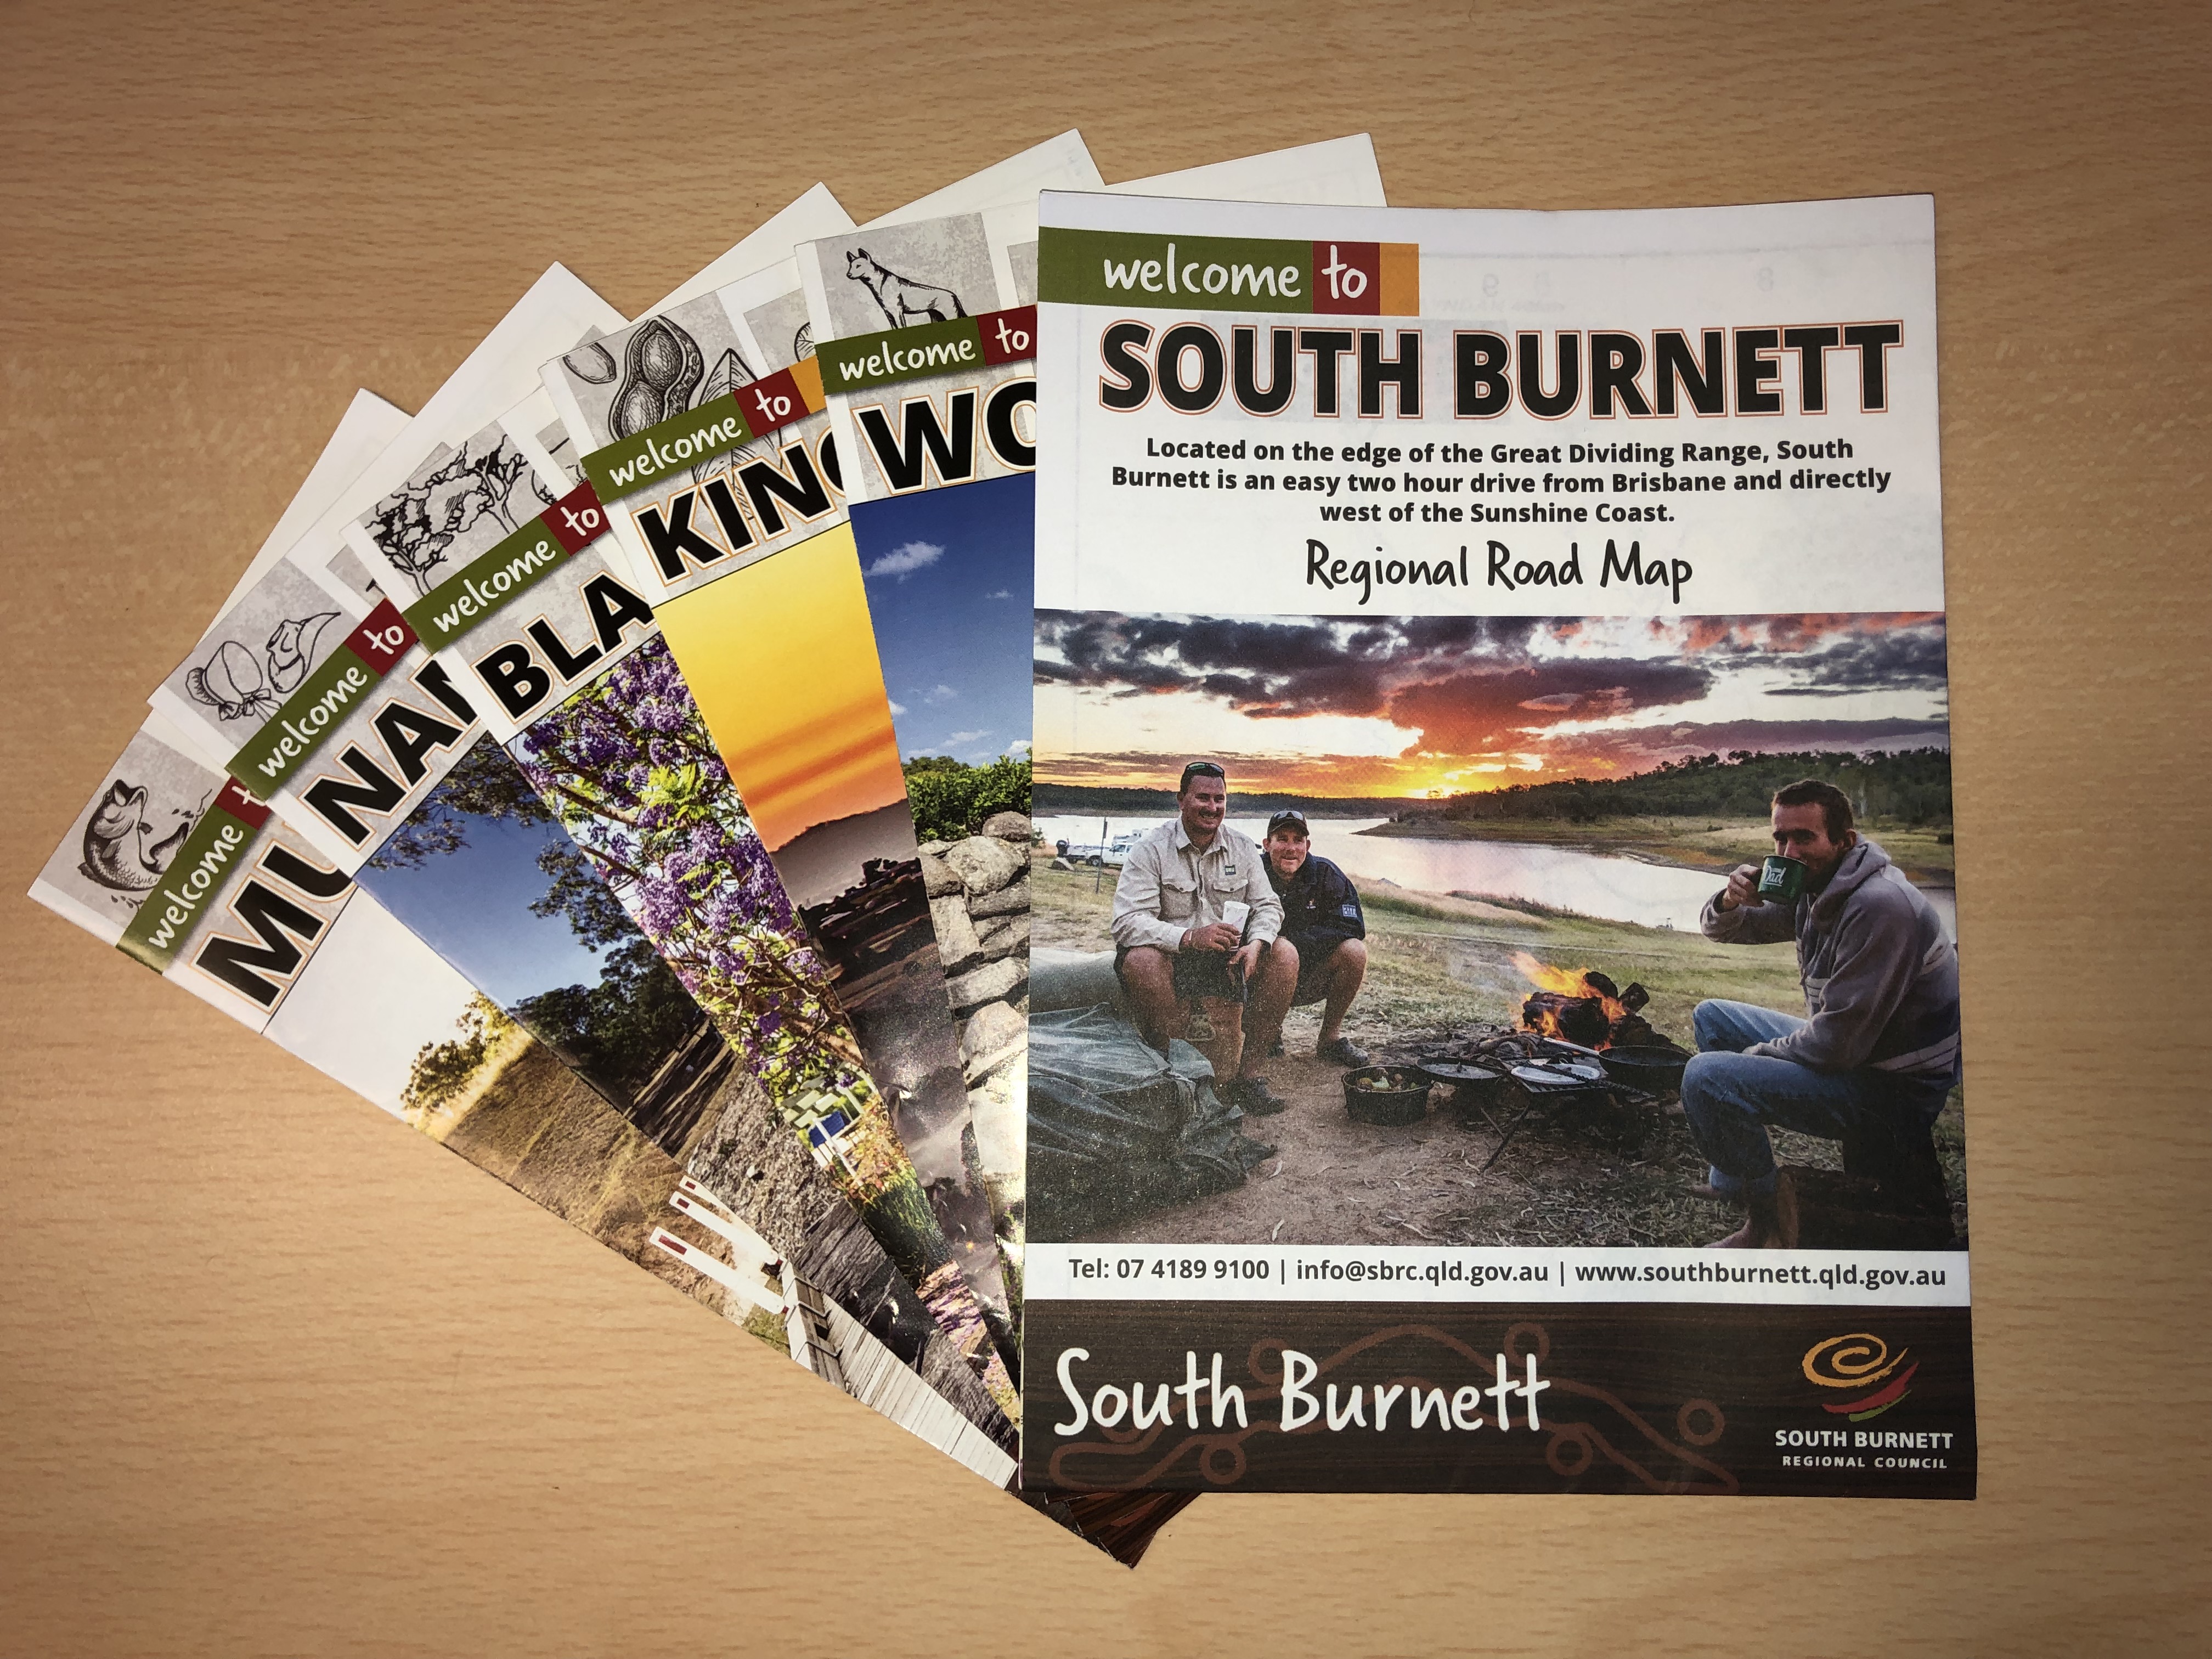 Image: New South Burnett regional road map and town guides